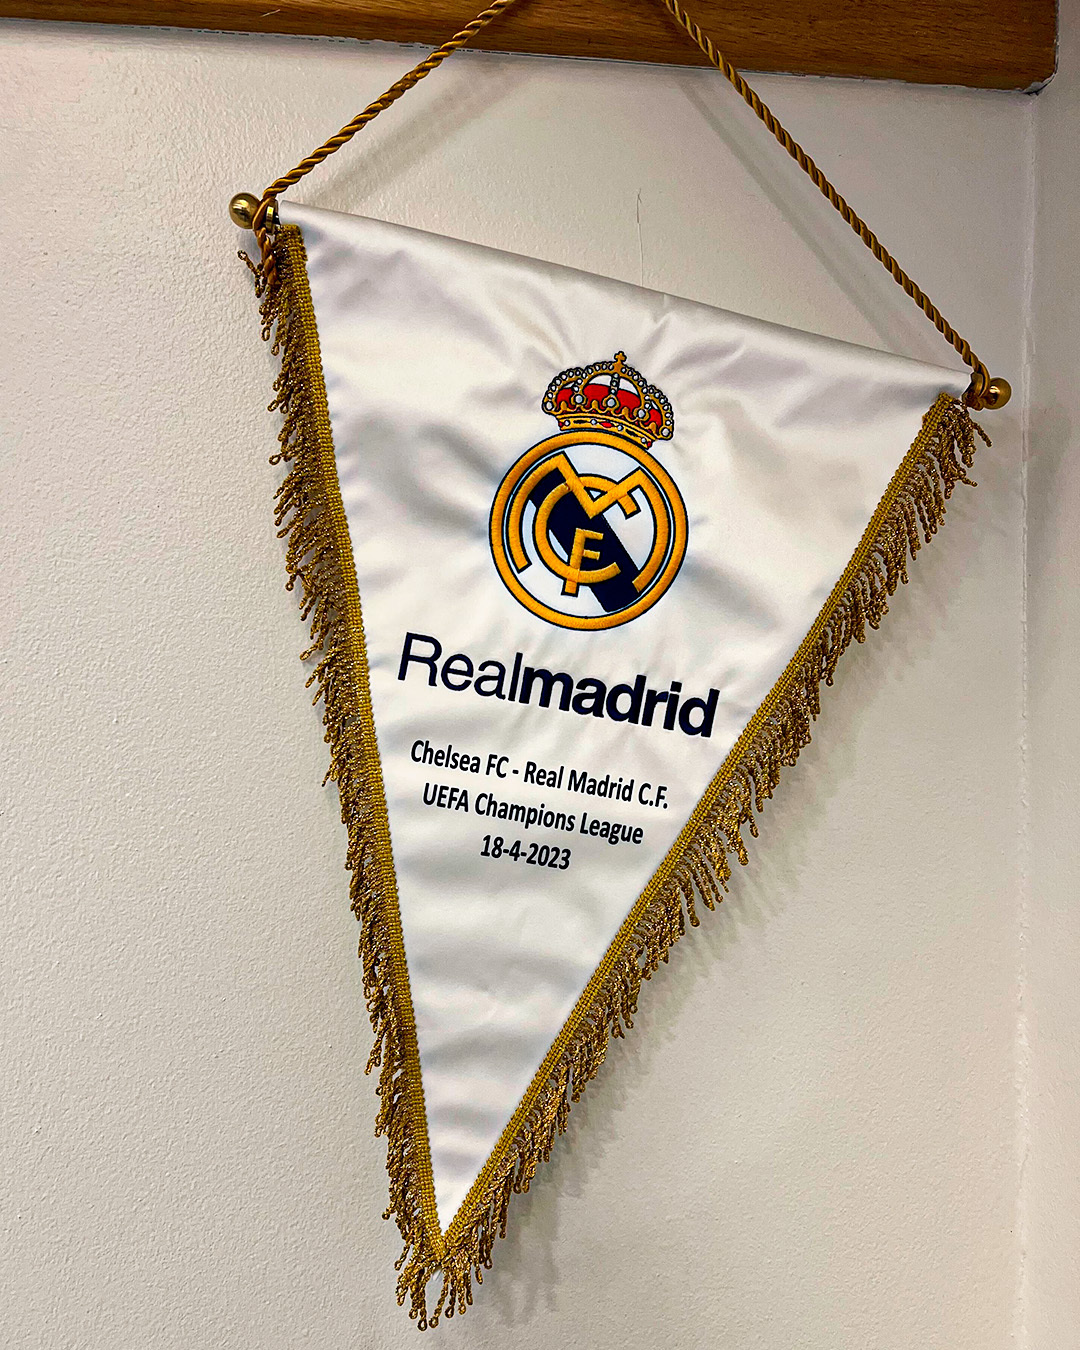 Real Madrid Flag Banner 3x5ft Champions League 2022 Merengue Flag